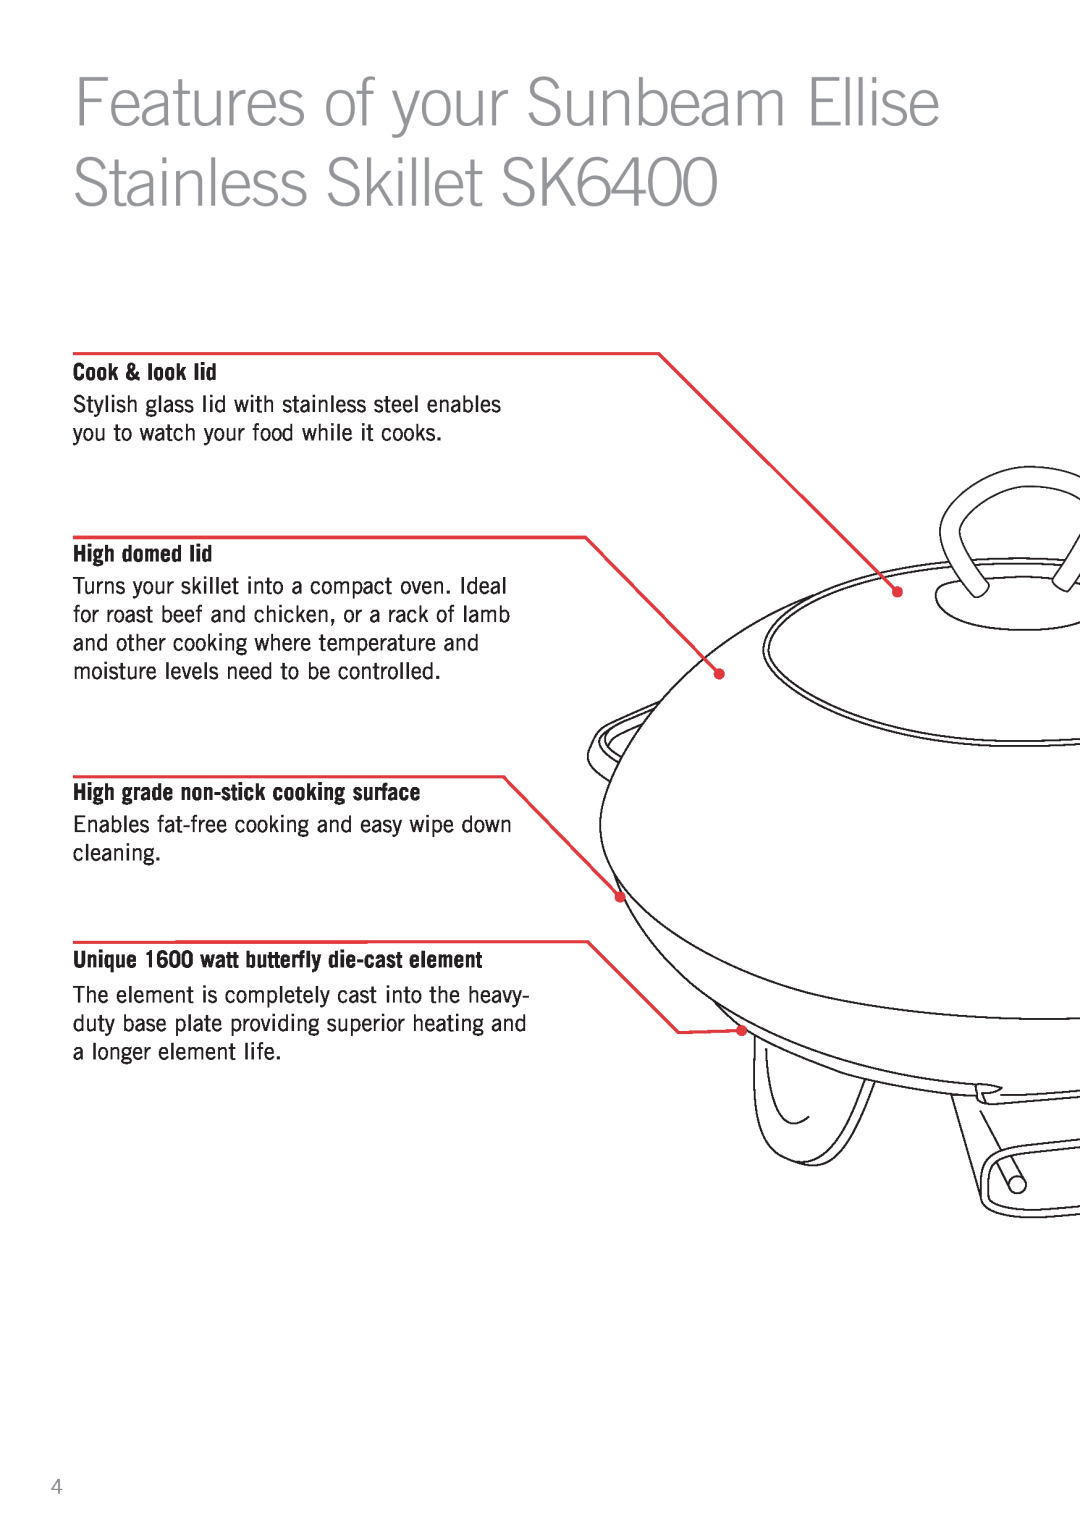 Sunbeam SK6410 manual Features of your Sunbeam Ellise Stainless Skillet SK6400, Cook & look lid, High domed lid 